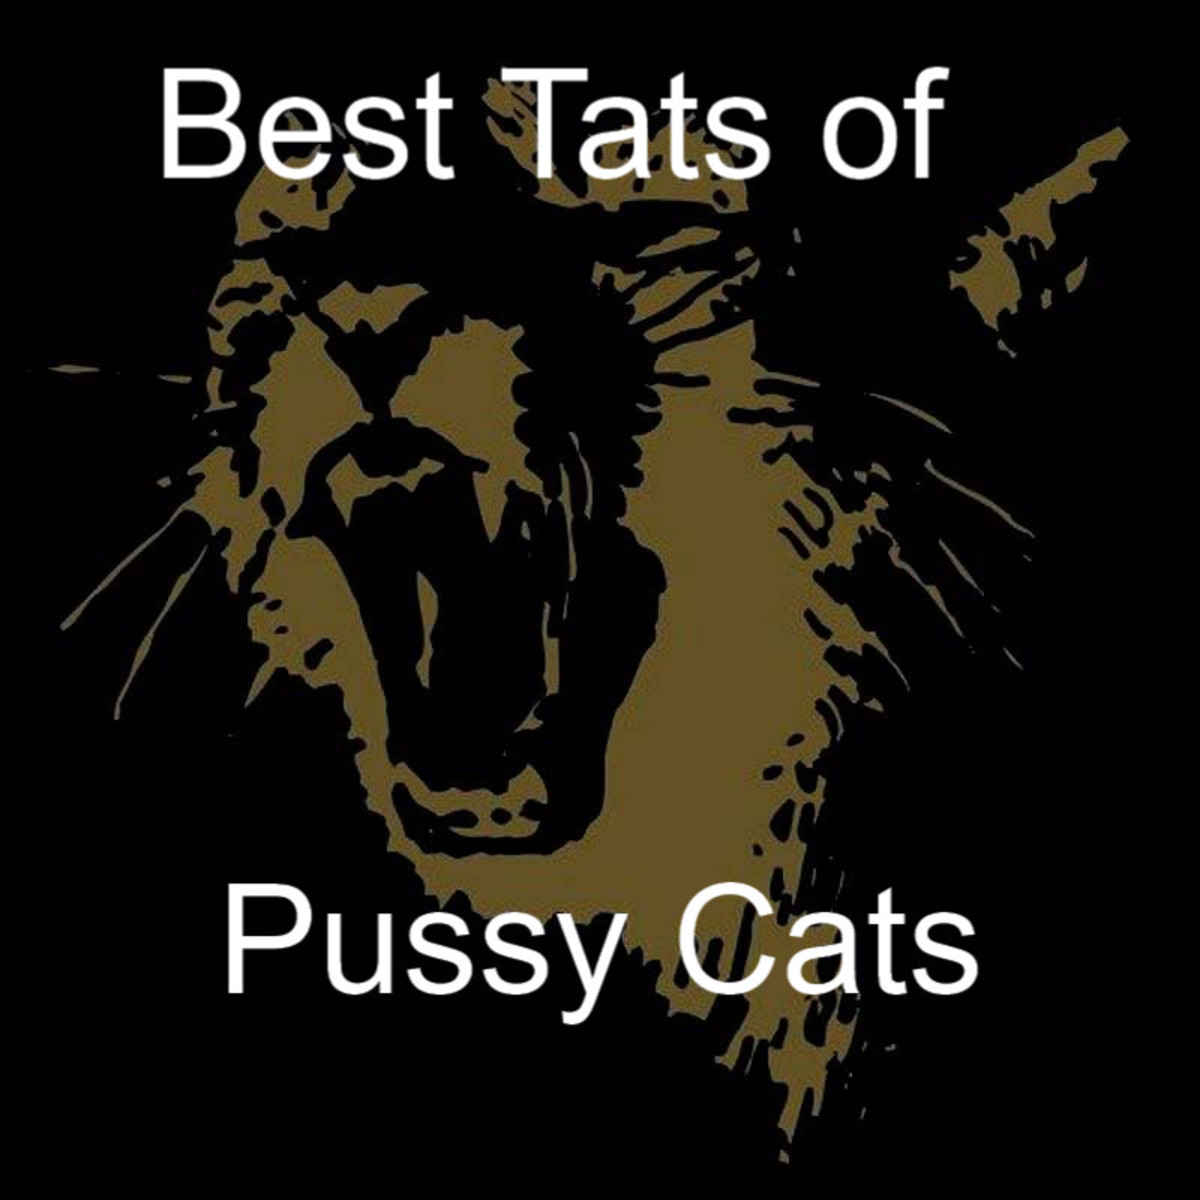 The Best Tats of Pussy Cats